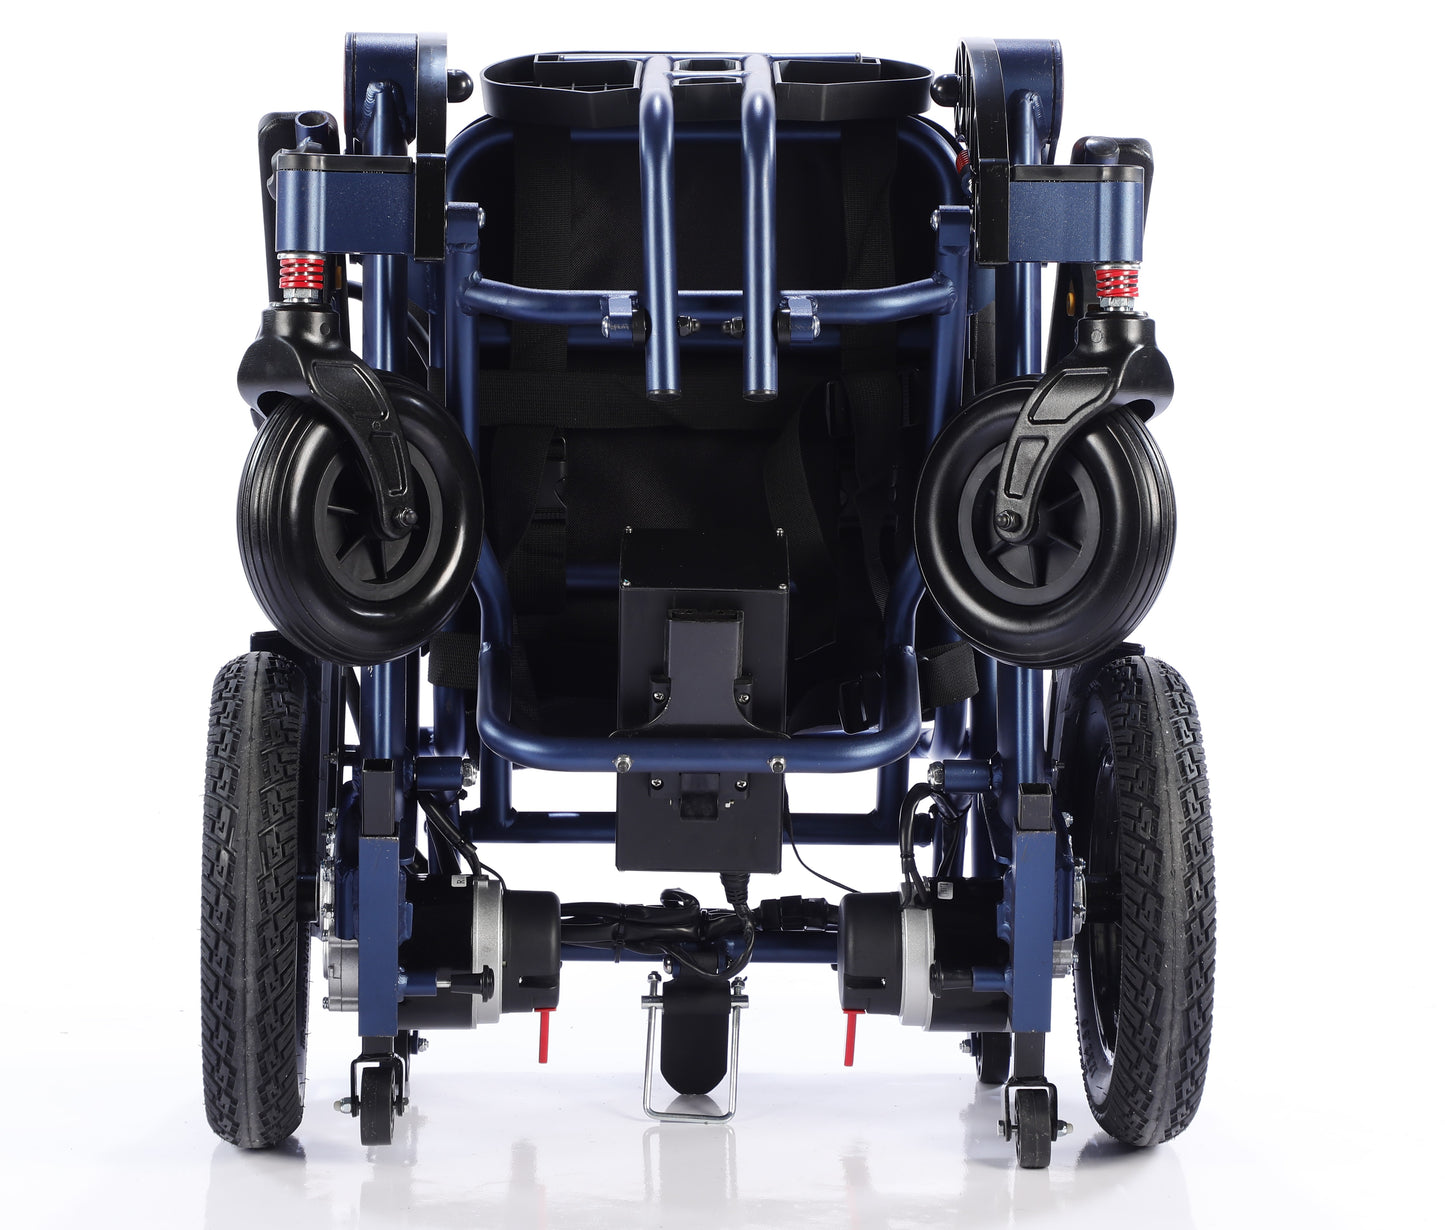 Dr.Ortho electric wheelchair DR-N-20-D blue frame light weight aluminum frame with lithium battery motor 250W